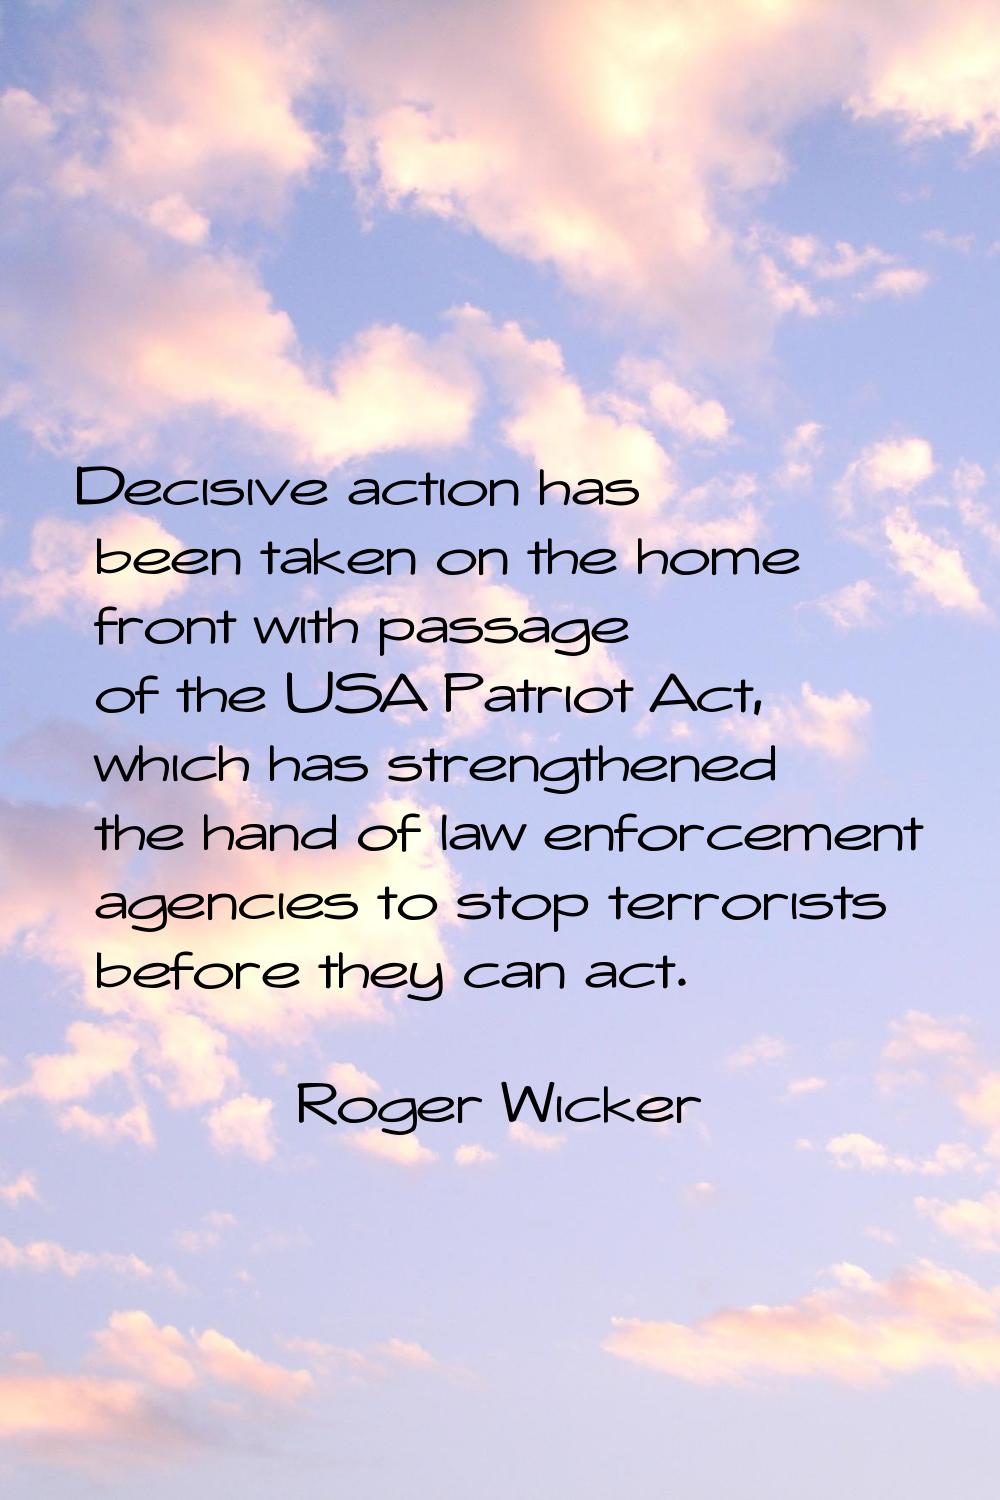 Decisive action has been taken on the home front with passage of the USA Patriot Act, which has str